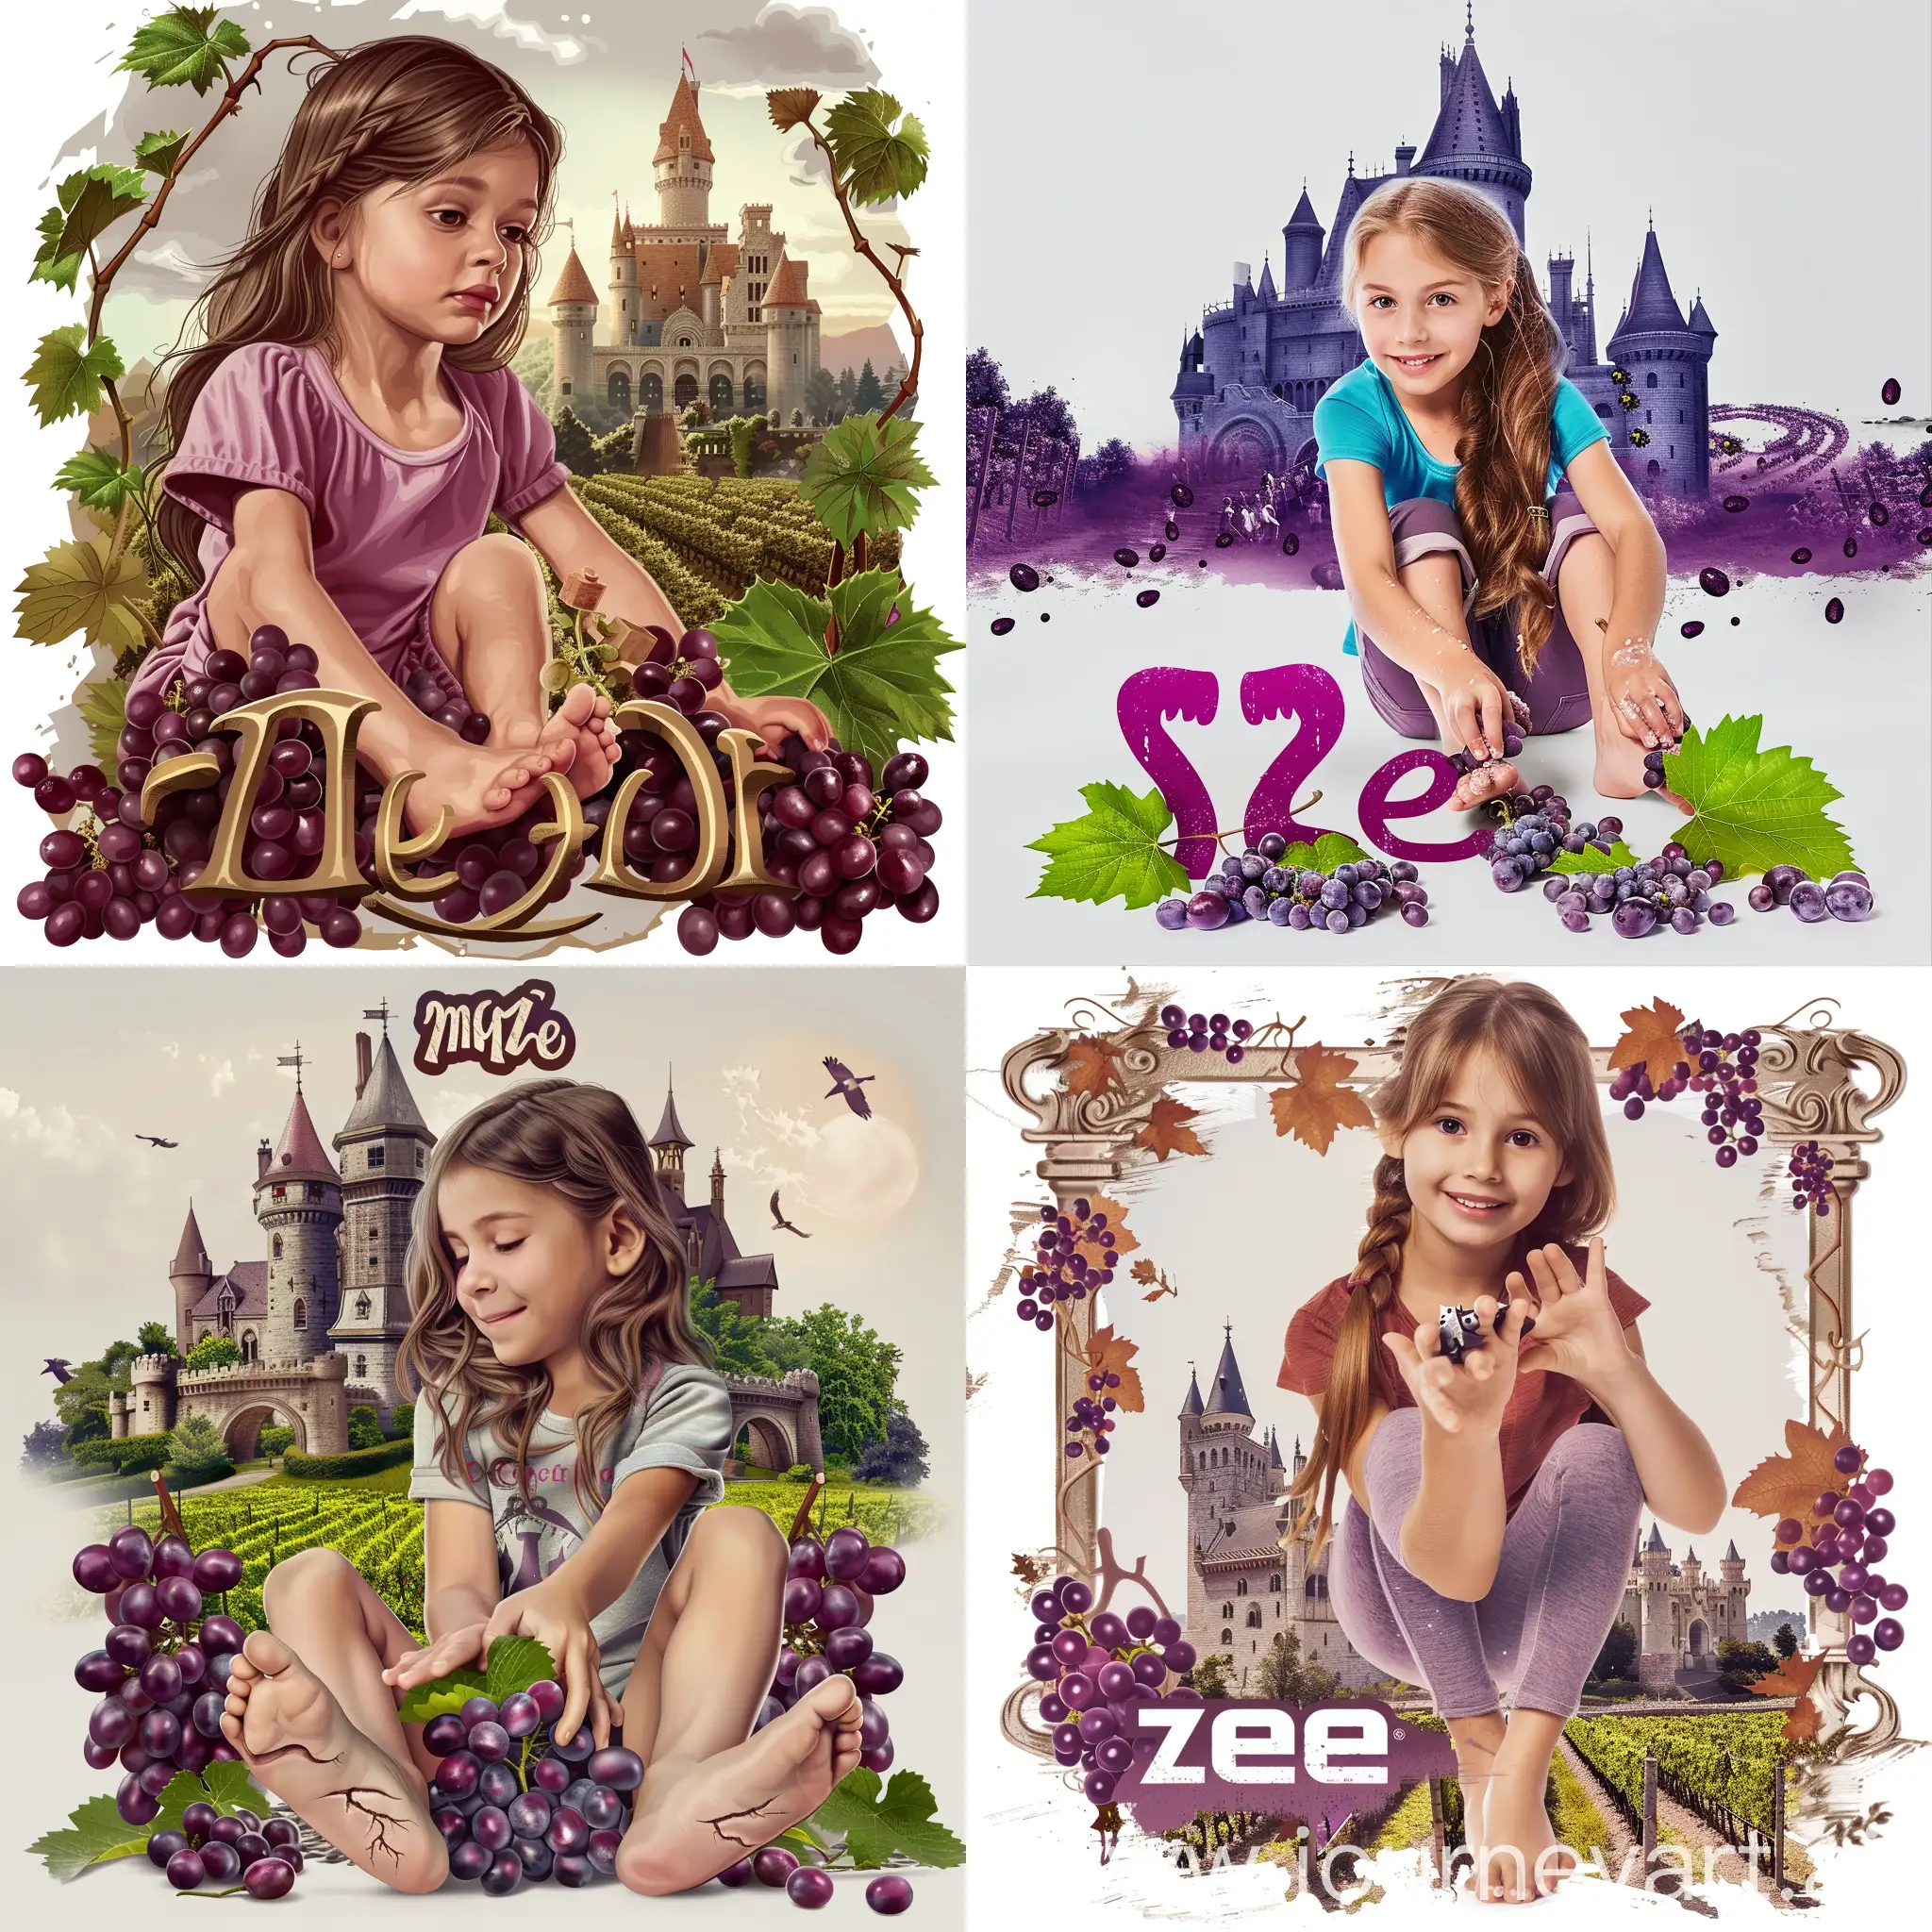 Young-Girl-Crushing-Grapes-at-Zile-Castle-Realistic-Logo